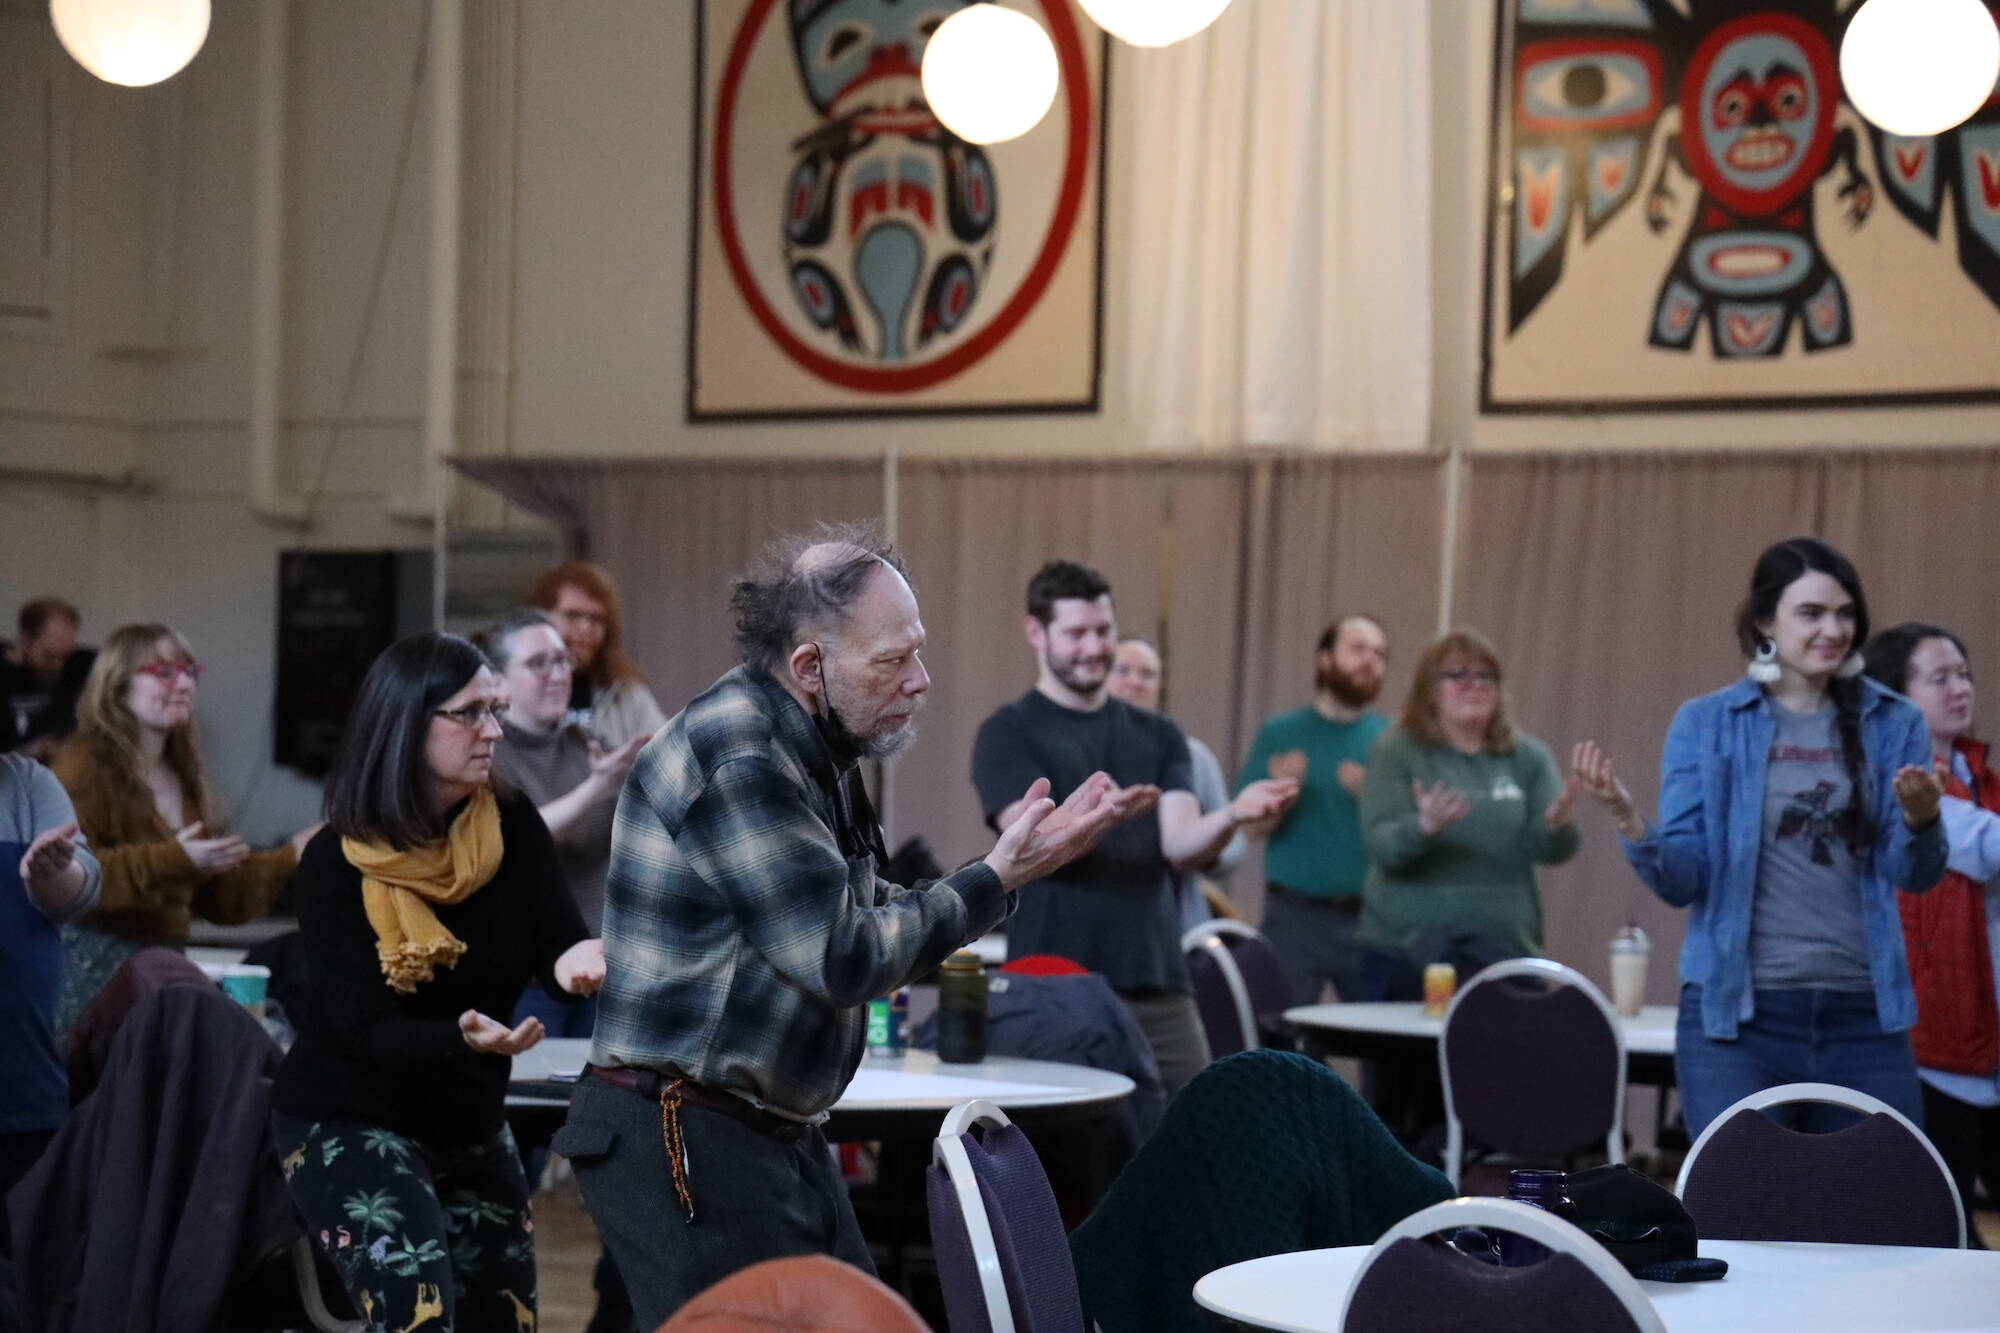 Attendees of the Alaska Music Summit on Saturday danced during the land acknowledgement and opening song performed at the Juneau Arts and Culture Center late Saturday morning. (Clarise Larson / Juneau Empire)